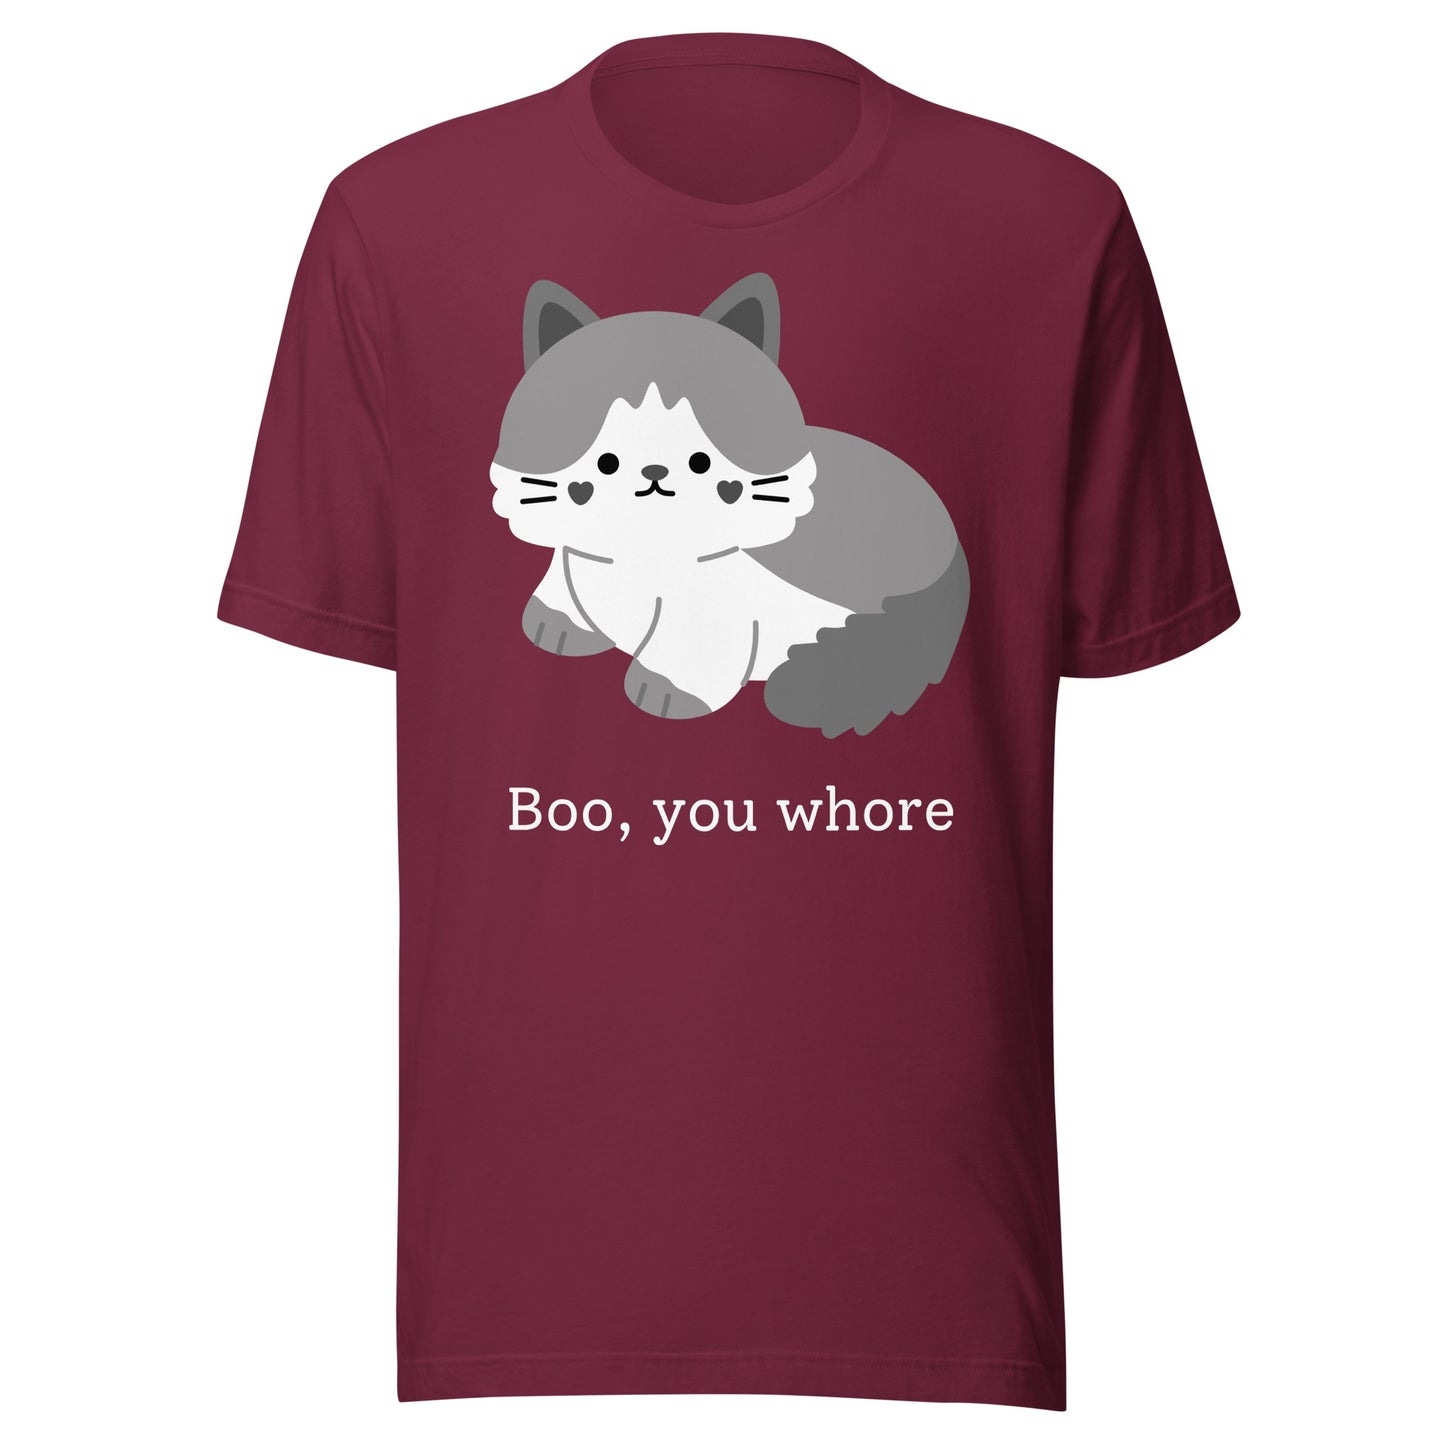 "Boo, you whore" - Unisex t-shirt